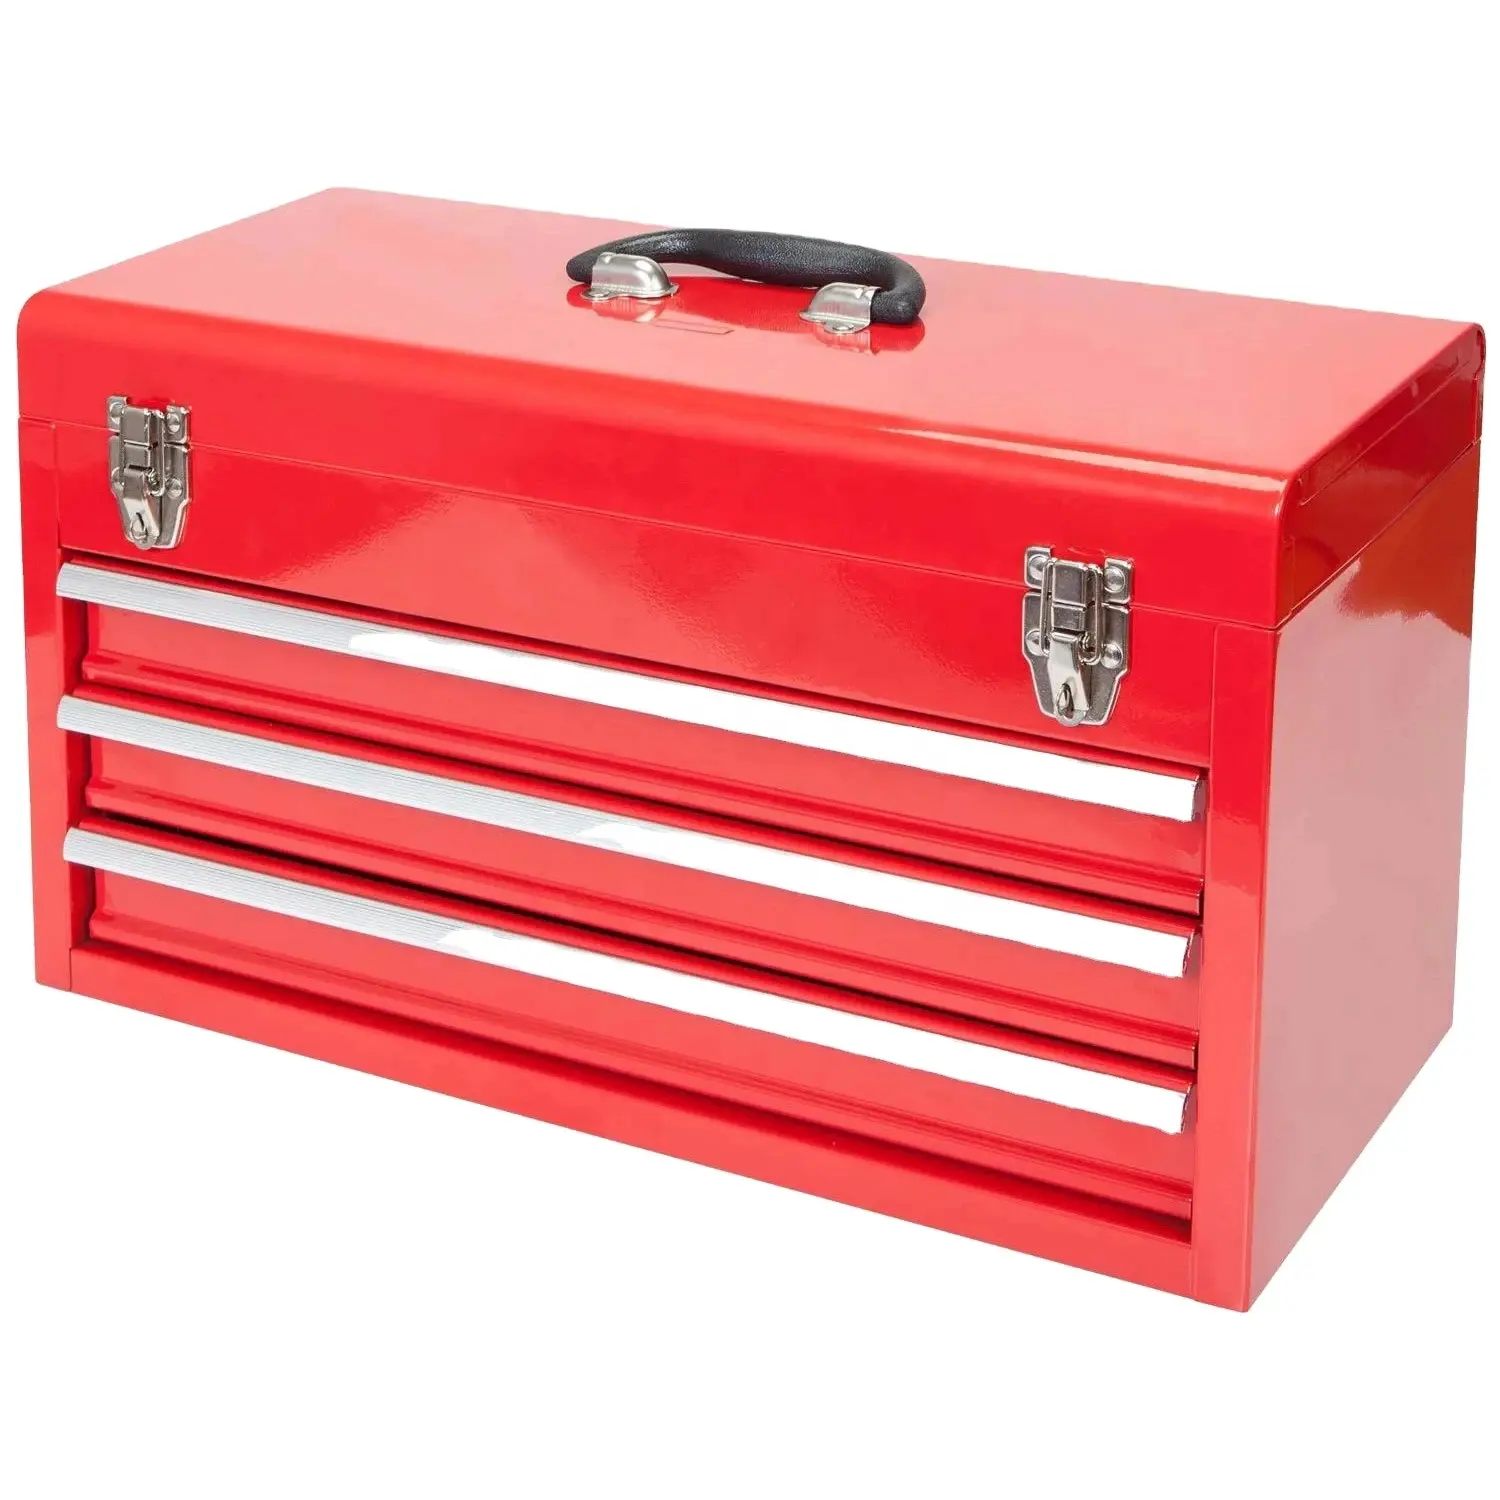 Portable iron material 20inch 3 Drawer tool chest wholesale with Metal Latch Closure tool chest cabinets